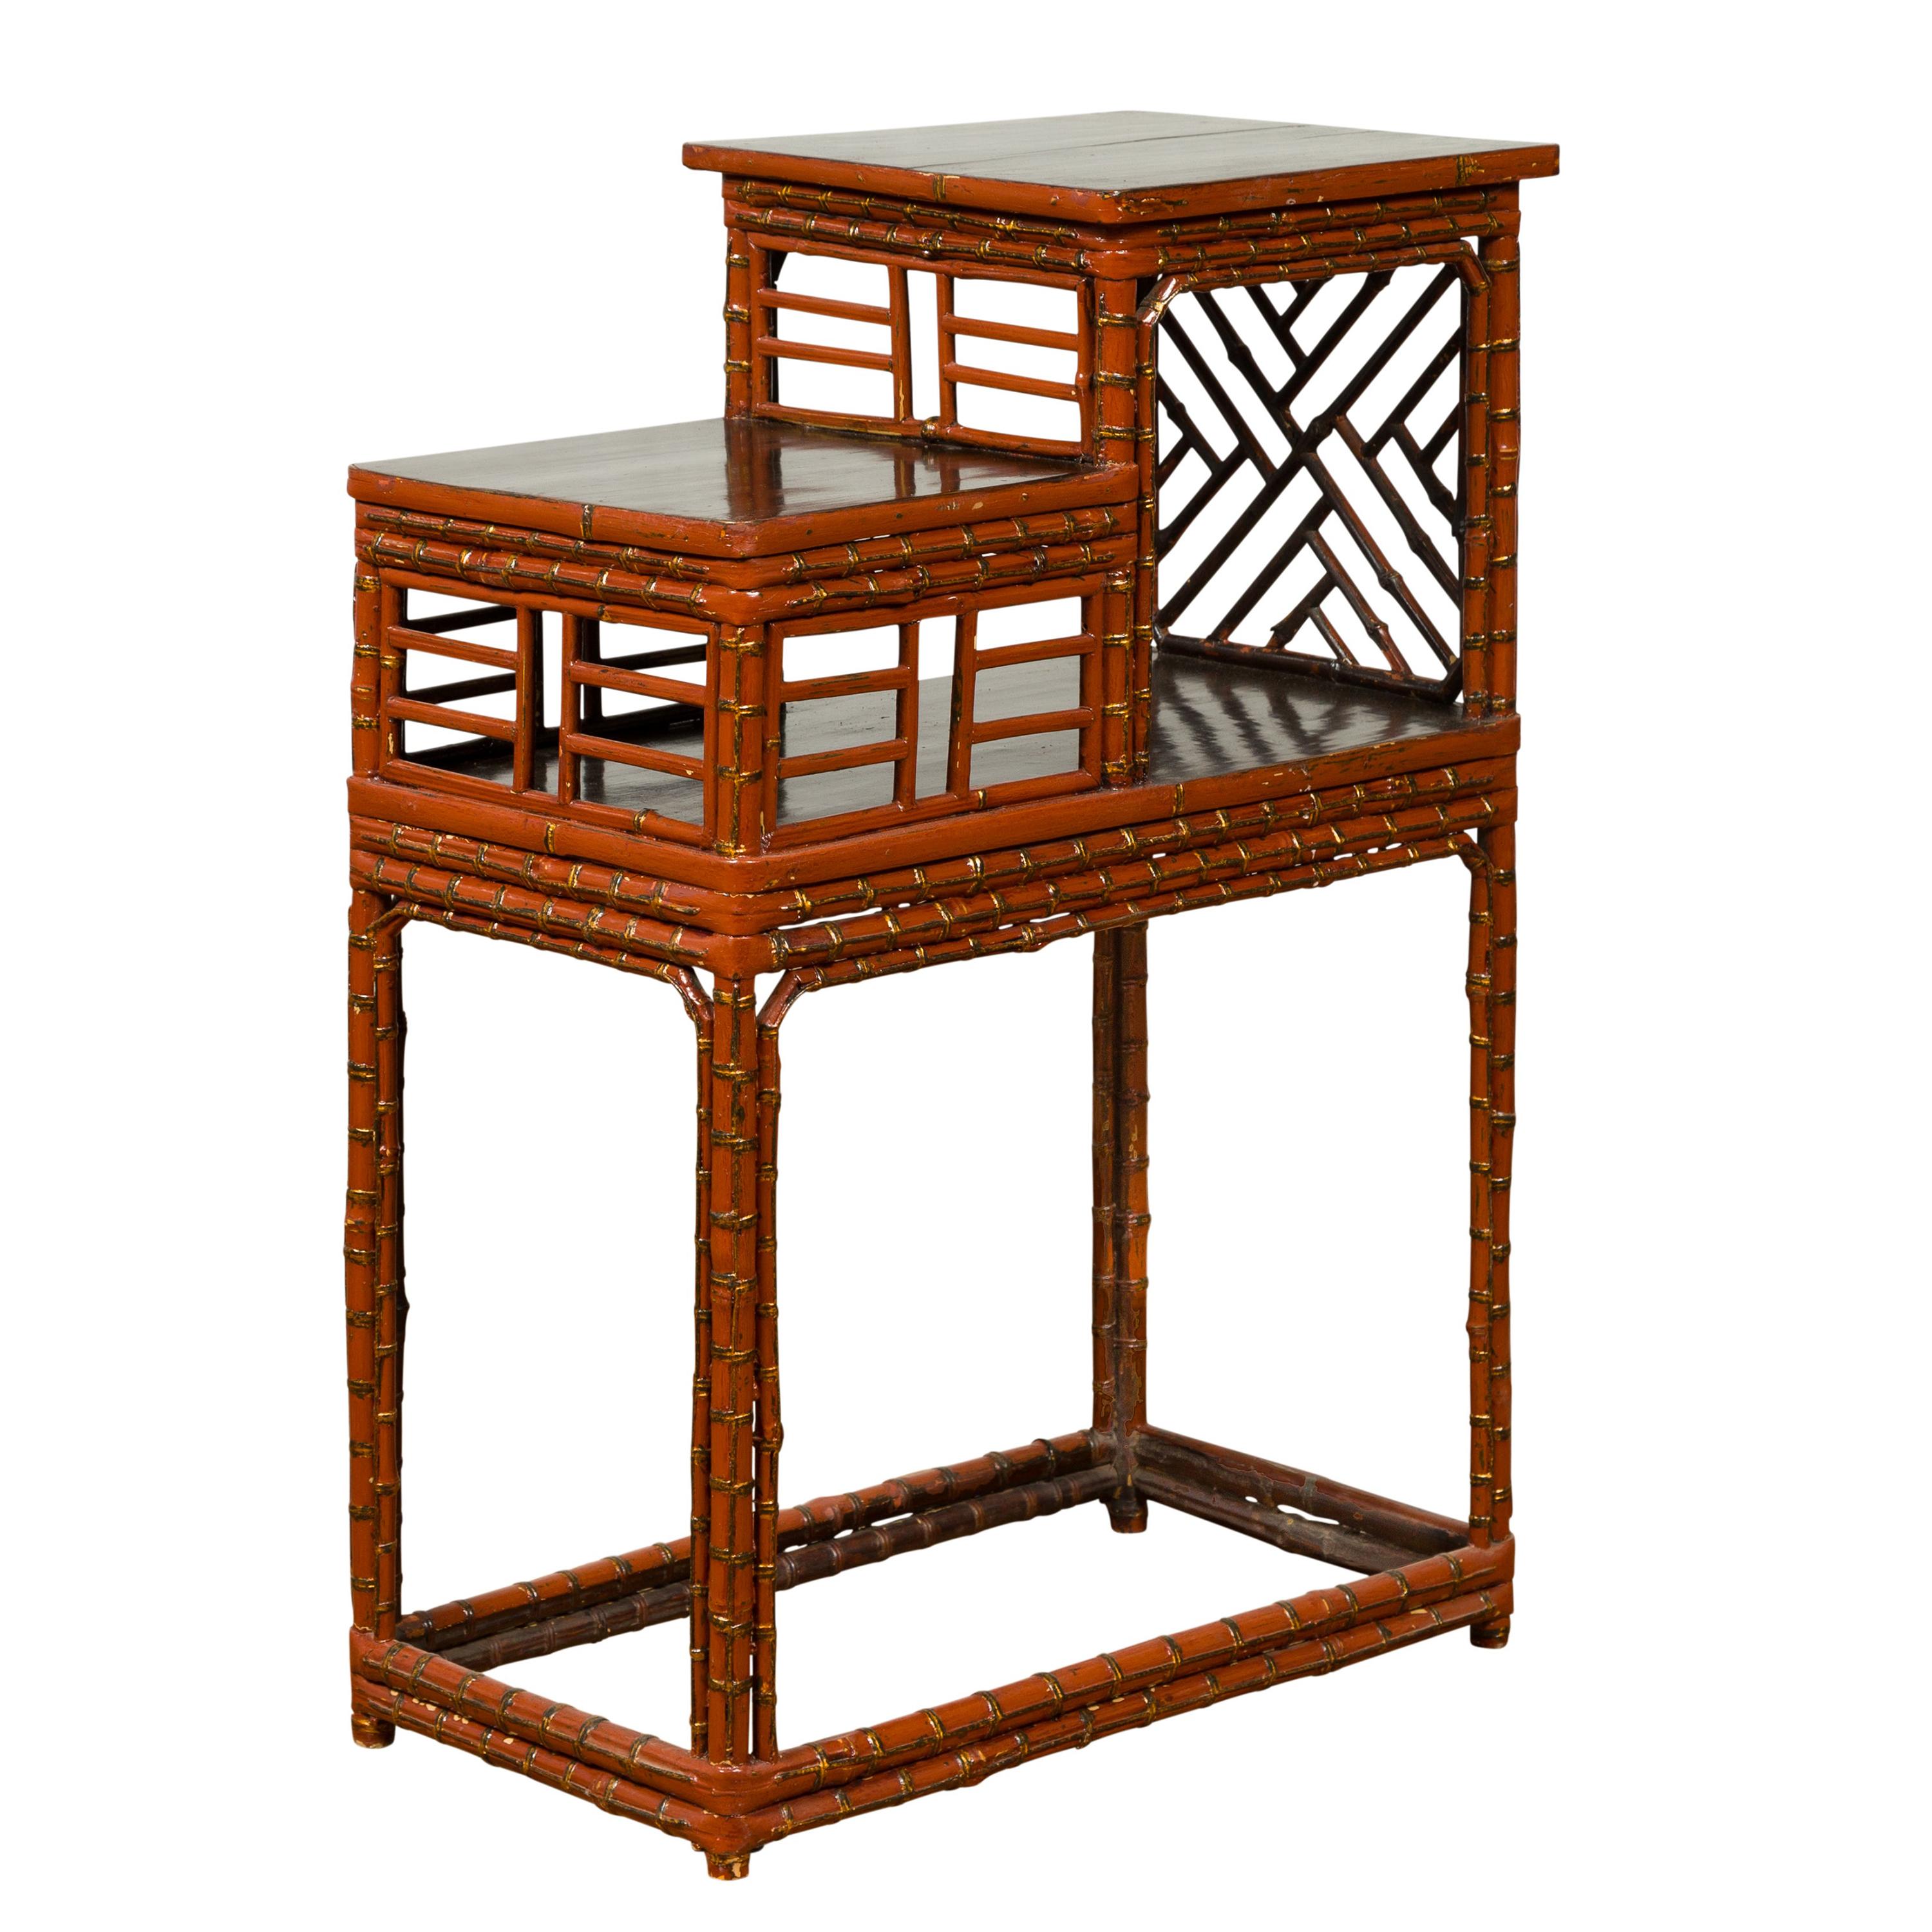 Vintage Lacquered Chinese Tiered Bamboo Lamp Table with Geometric Motifs